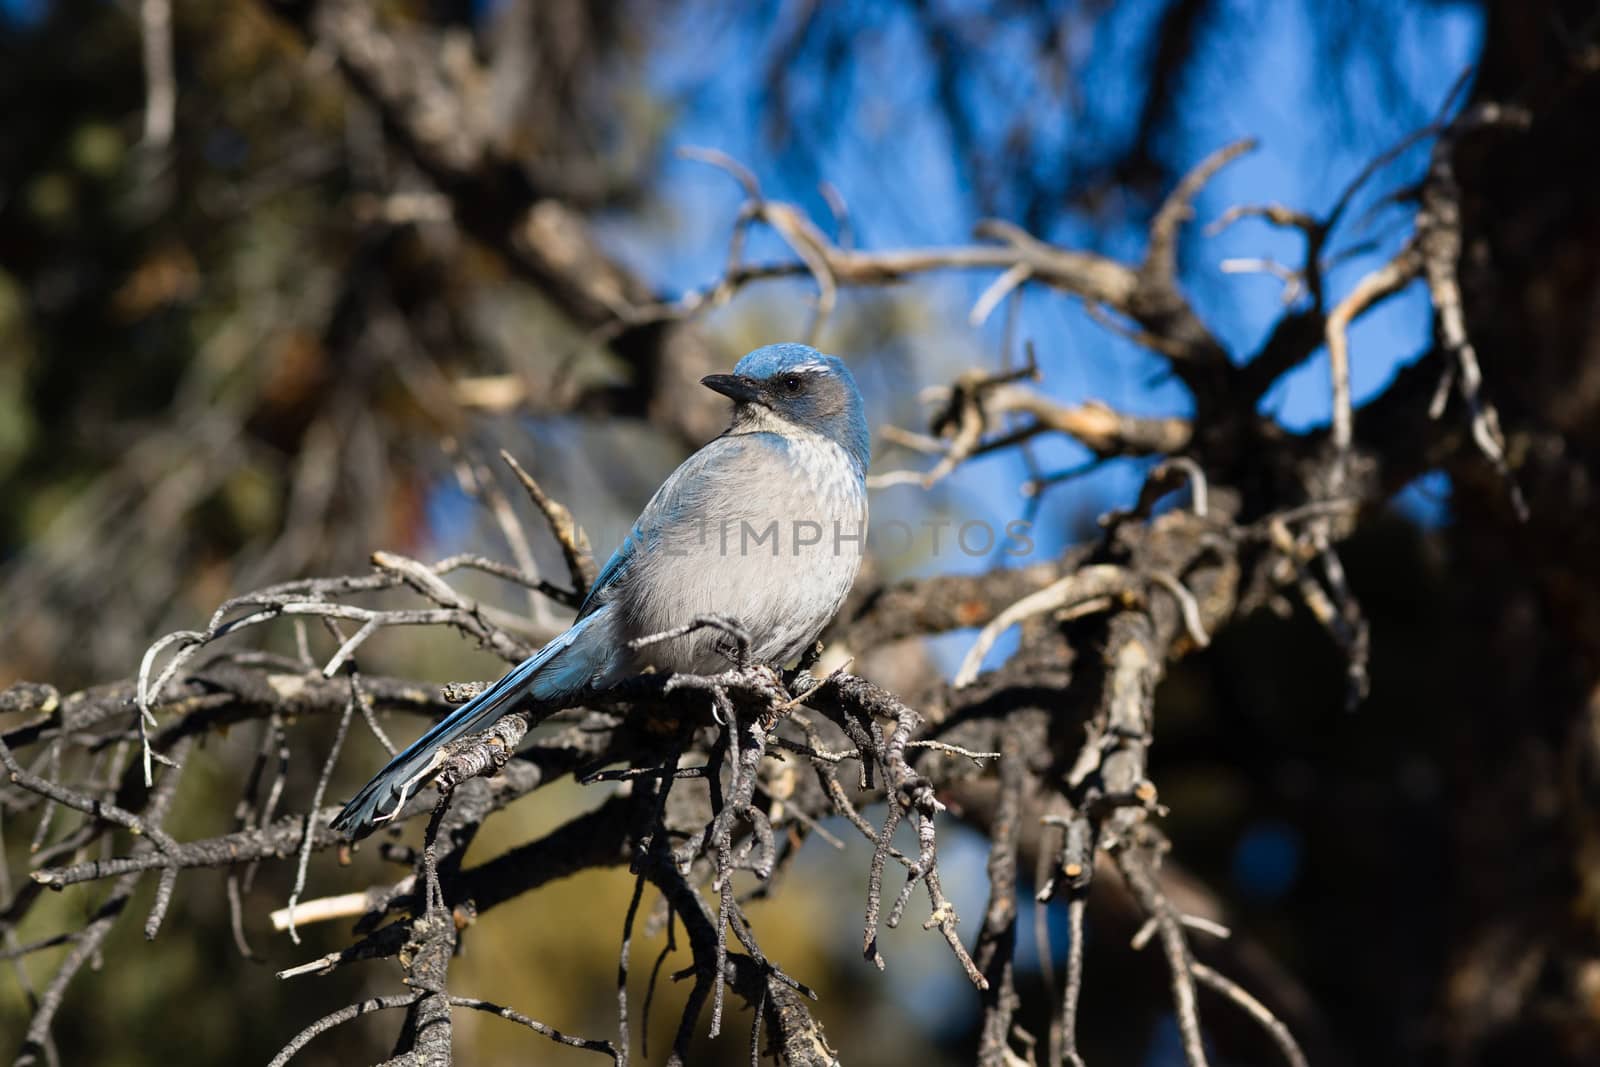 A blue wird hangs out in the picnic area looking for a handout